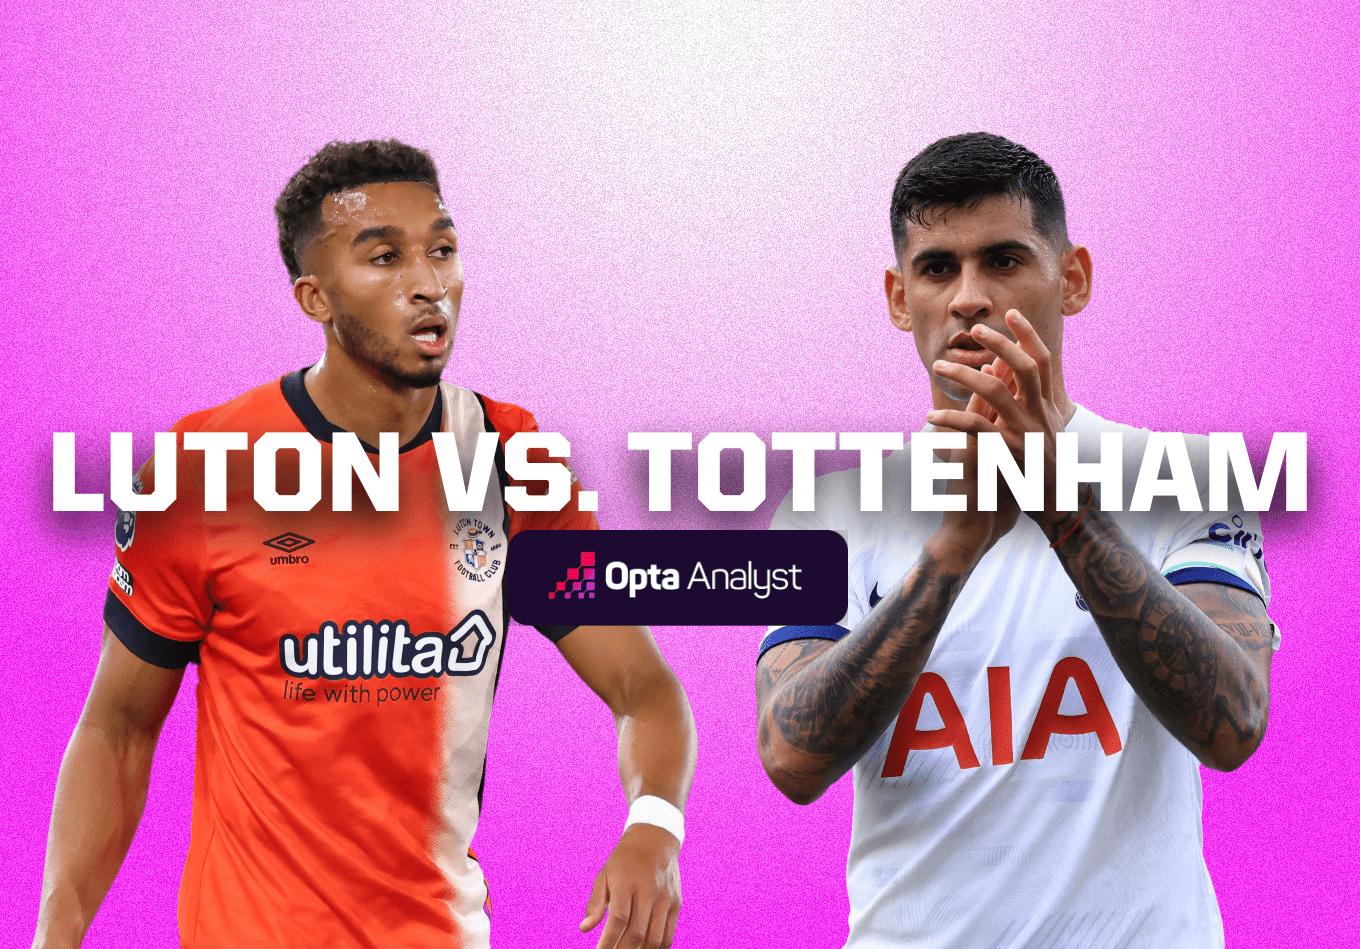 Luton Town vs Tottenham: Prediction and Preview